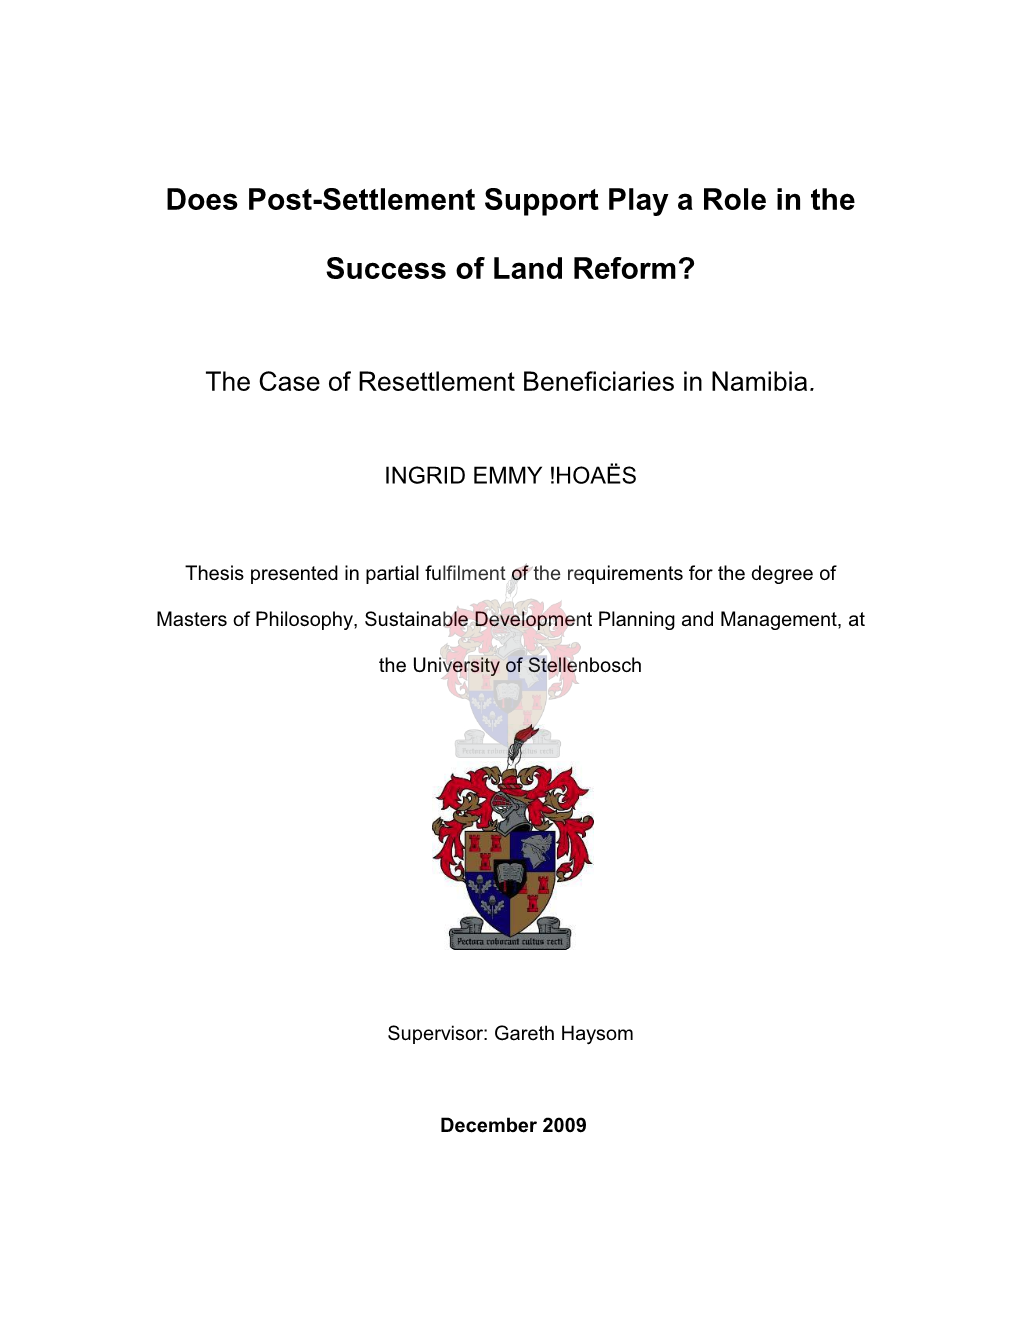 Does Post-Settlement Support Play a Role in the Success of Land Reform